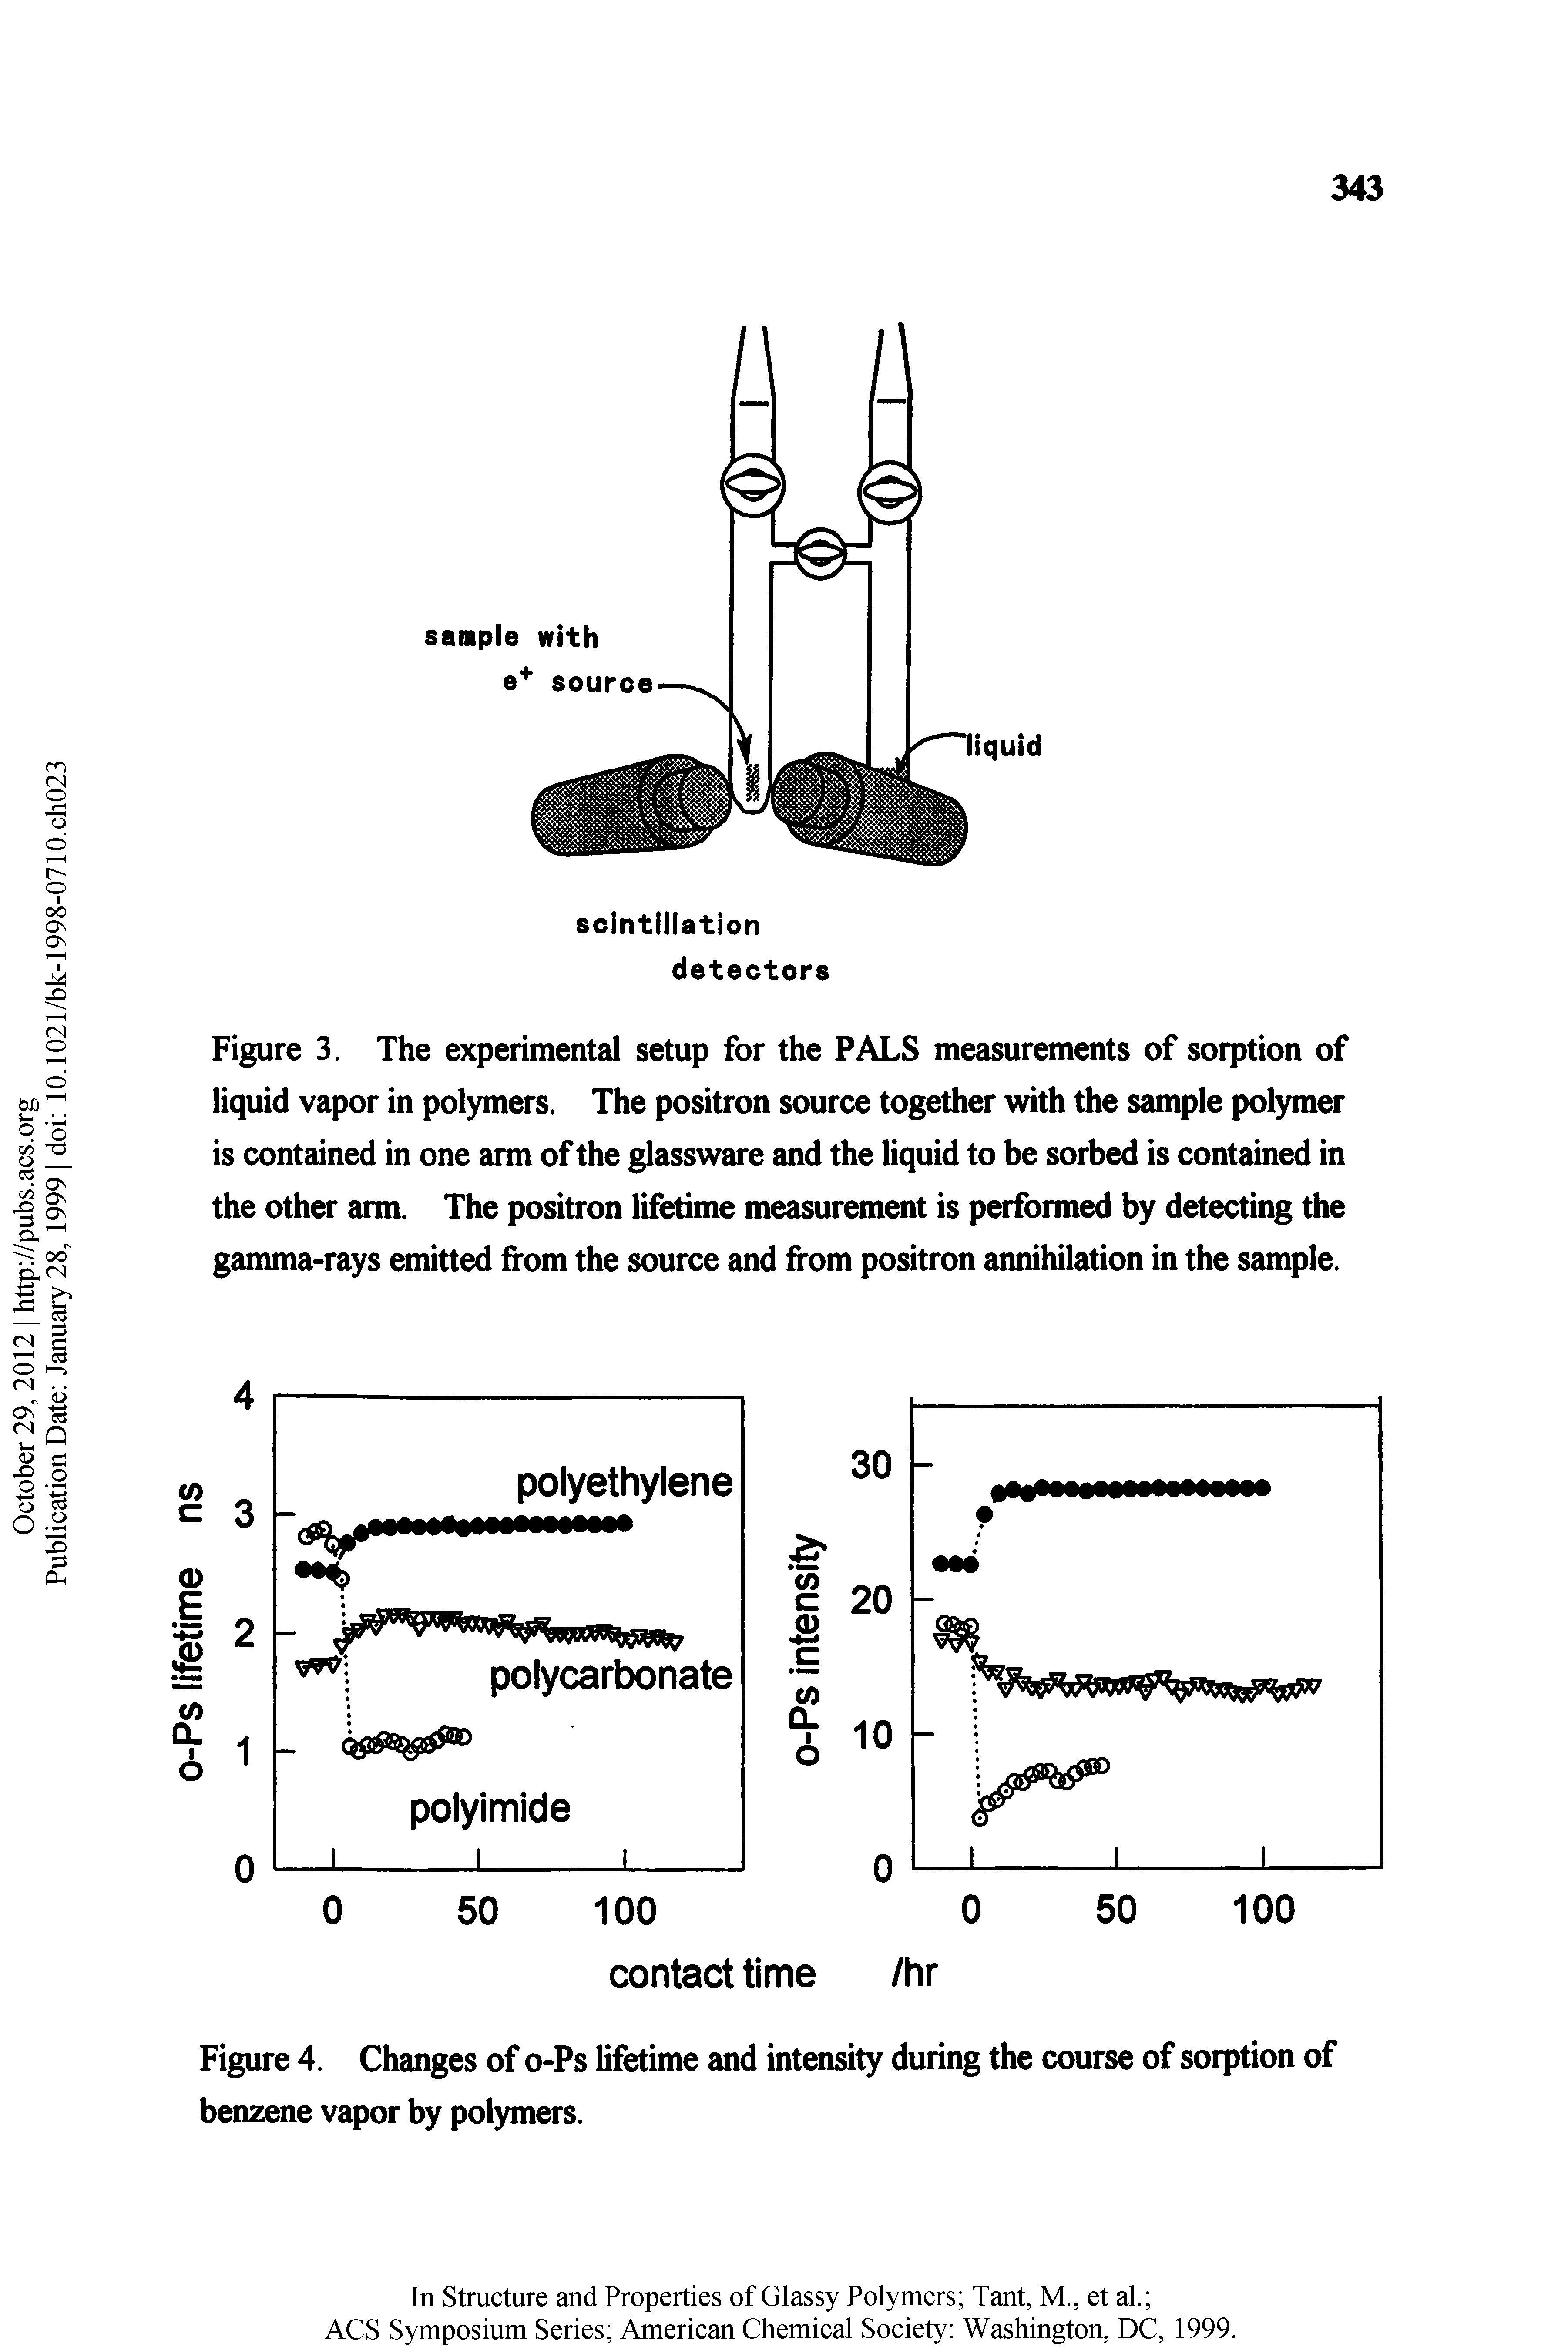 Figure 4. Changes of o-Ps lifetime and intensity during the course of sorption of benzene vapor by polymers.